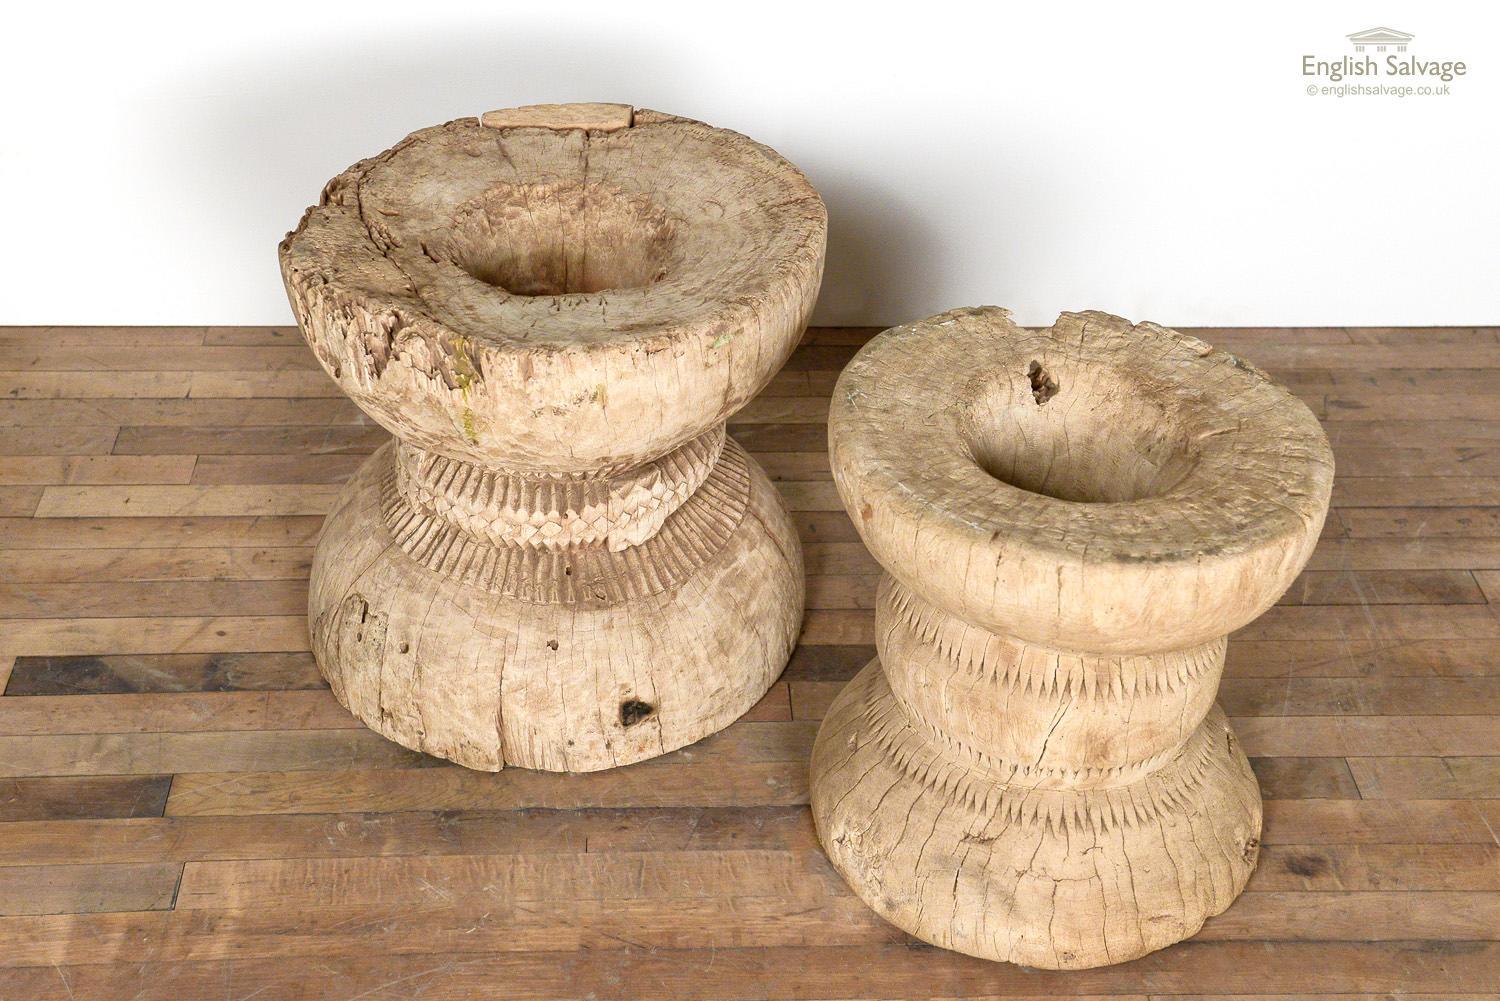 Salvaged softwood hand carved wooden reels or grinders which could be incorporated into an interior design in any number of ways: stools, tables, stands or as stand-alone decorative pieces. They are well-weathered with lots of age-related loss and